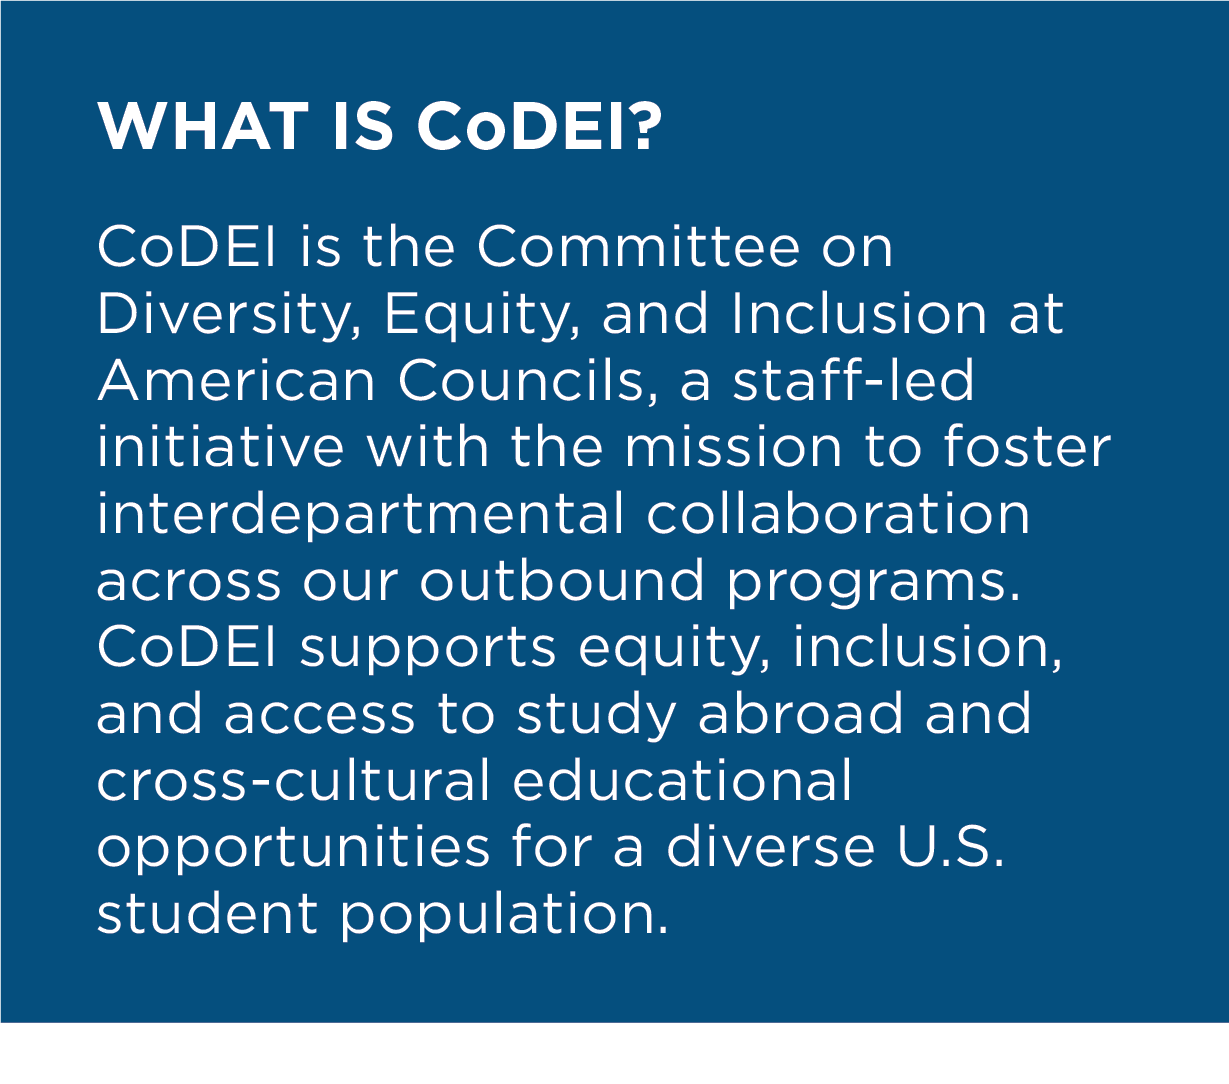 What is CoDEI?